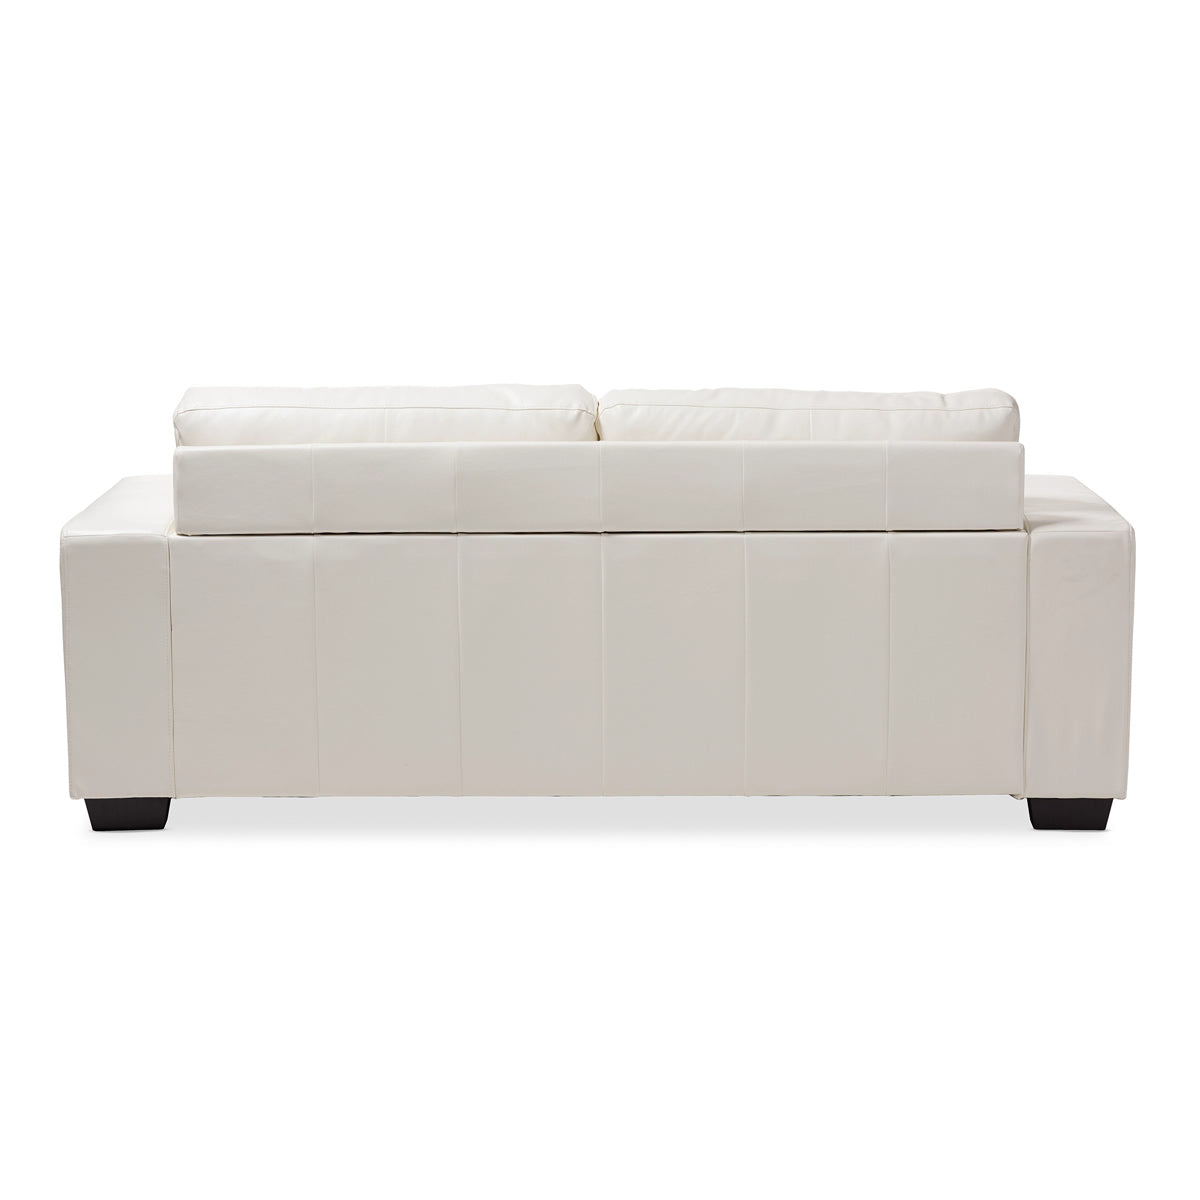 Baxton Studio Adalynn Modern and Contemporary White Faux Leather Upholstered Sofa Baxton Studio-sofas-Minimal And Modern - 4